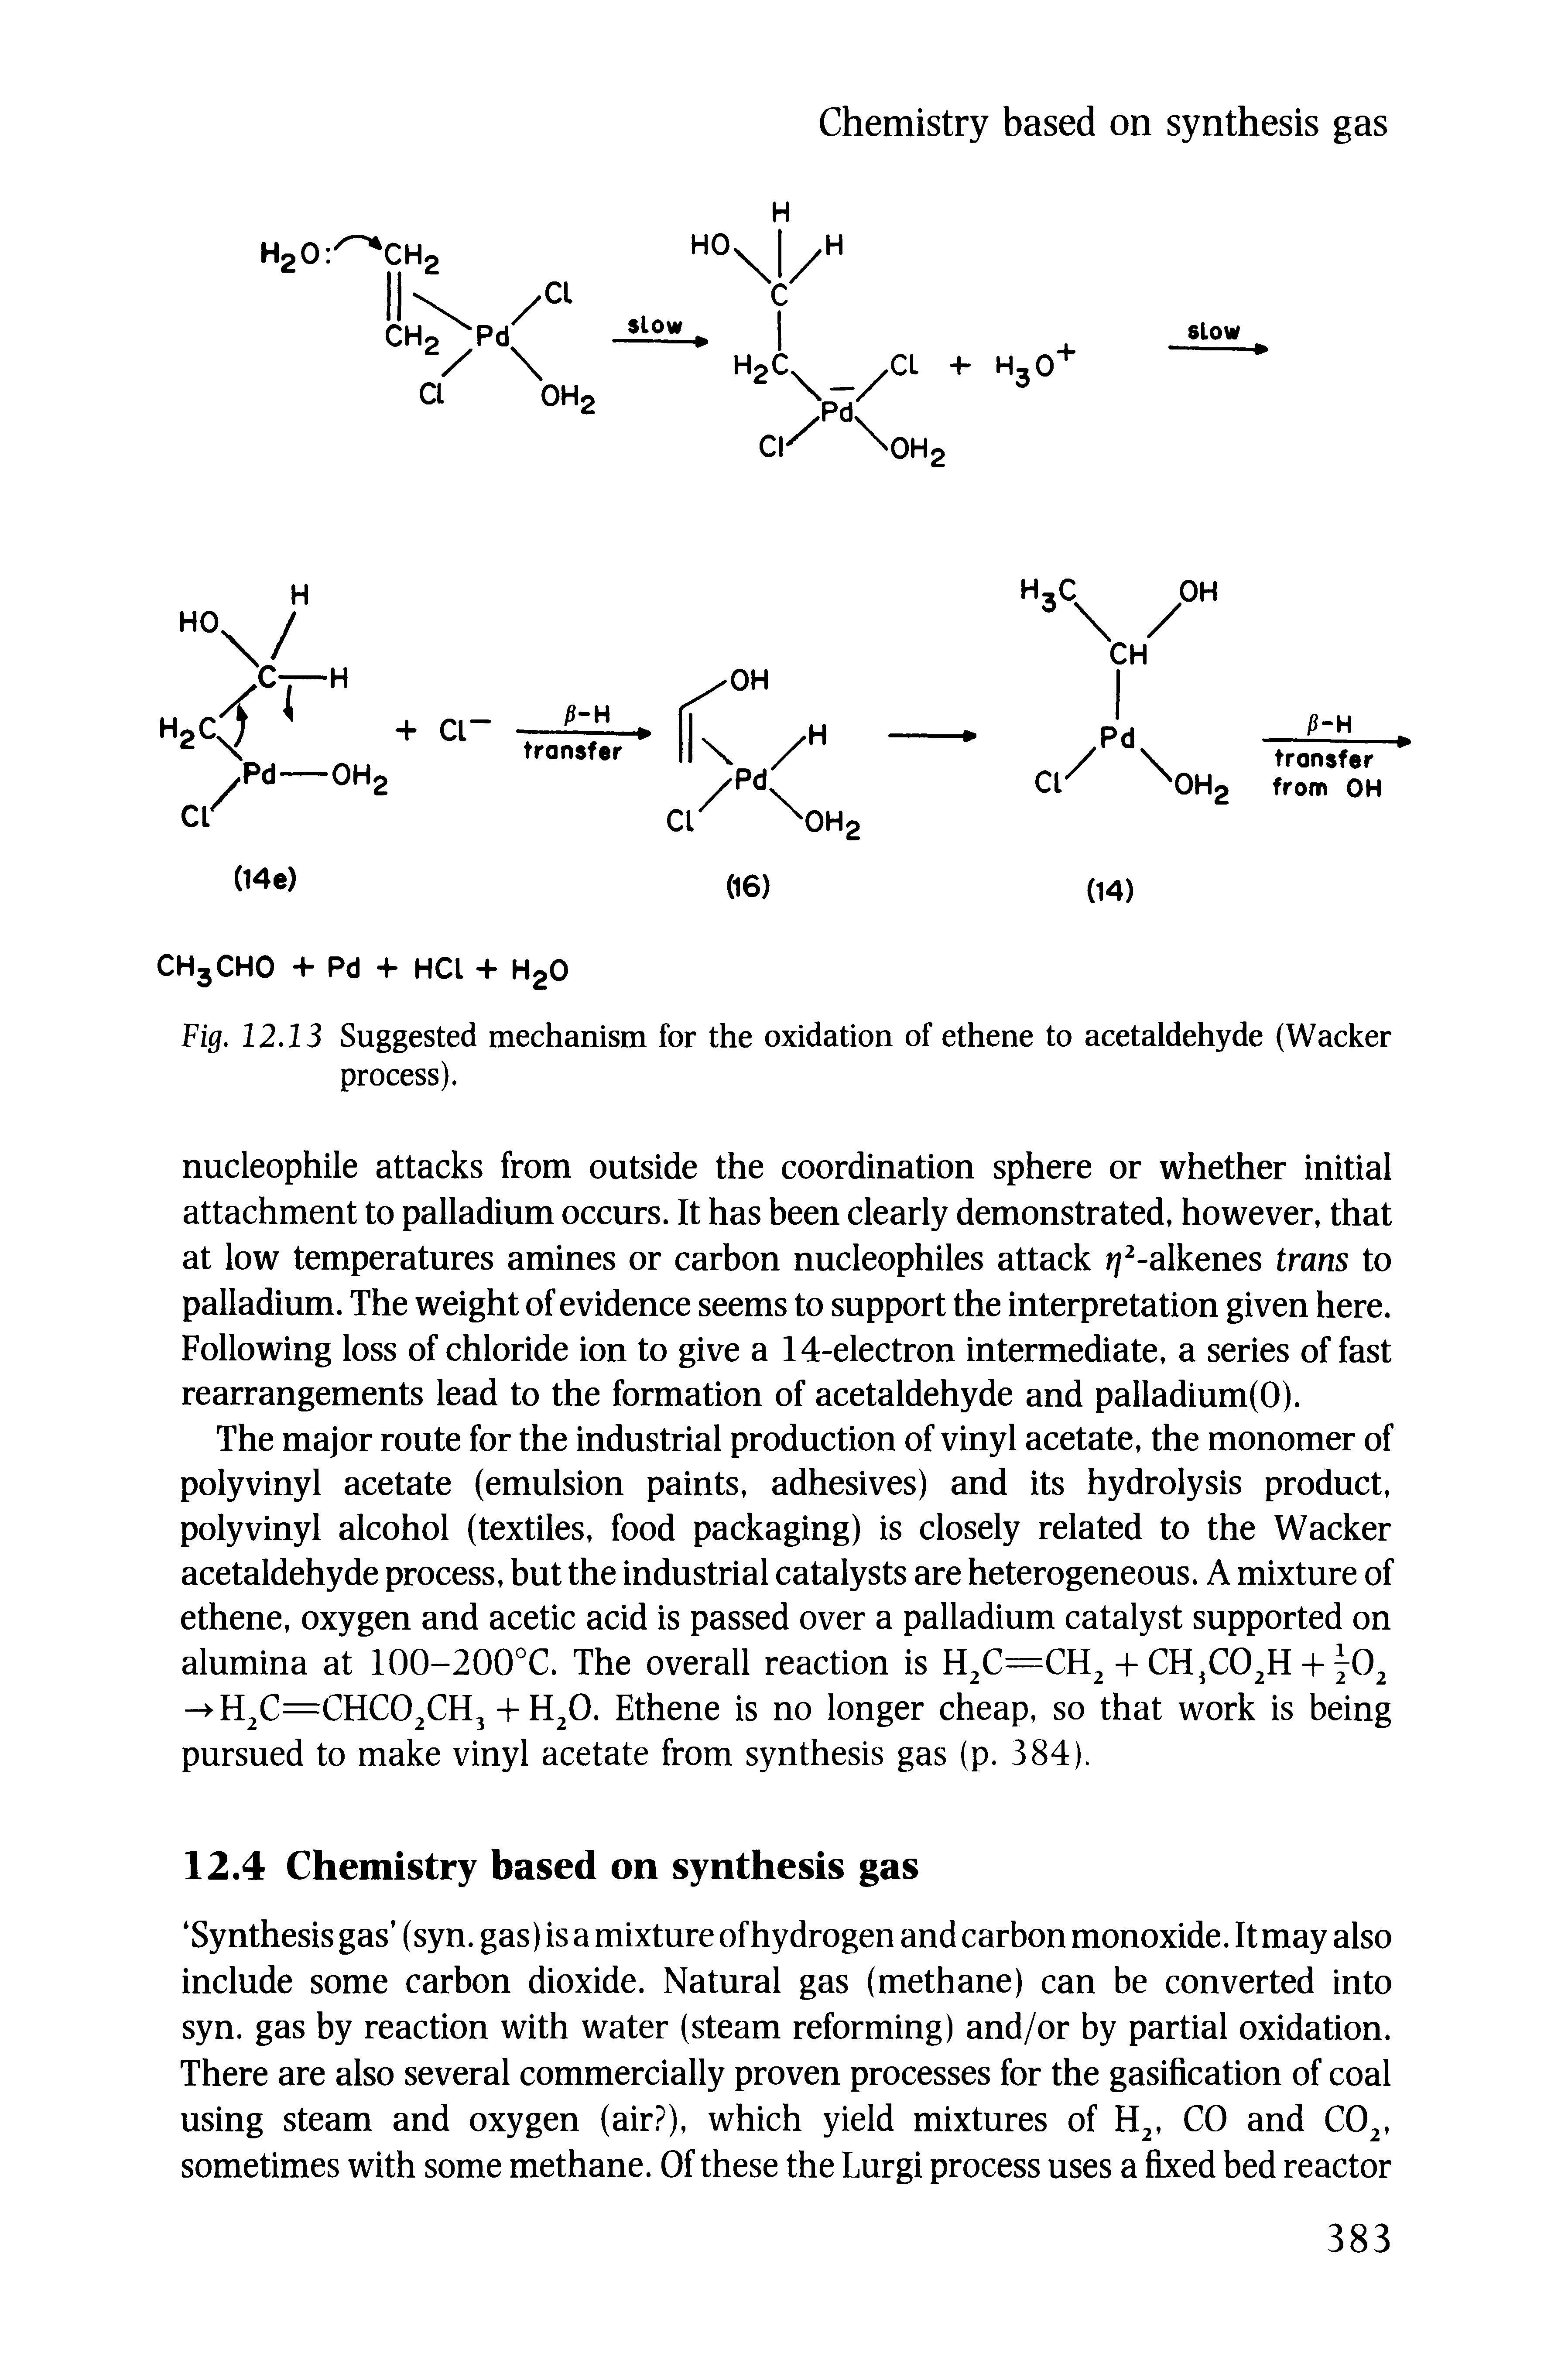 Fig. 12.13 Suggested mechanism for the oxidation of ethene to acetaldehyde (Wacker process).